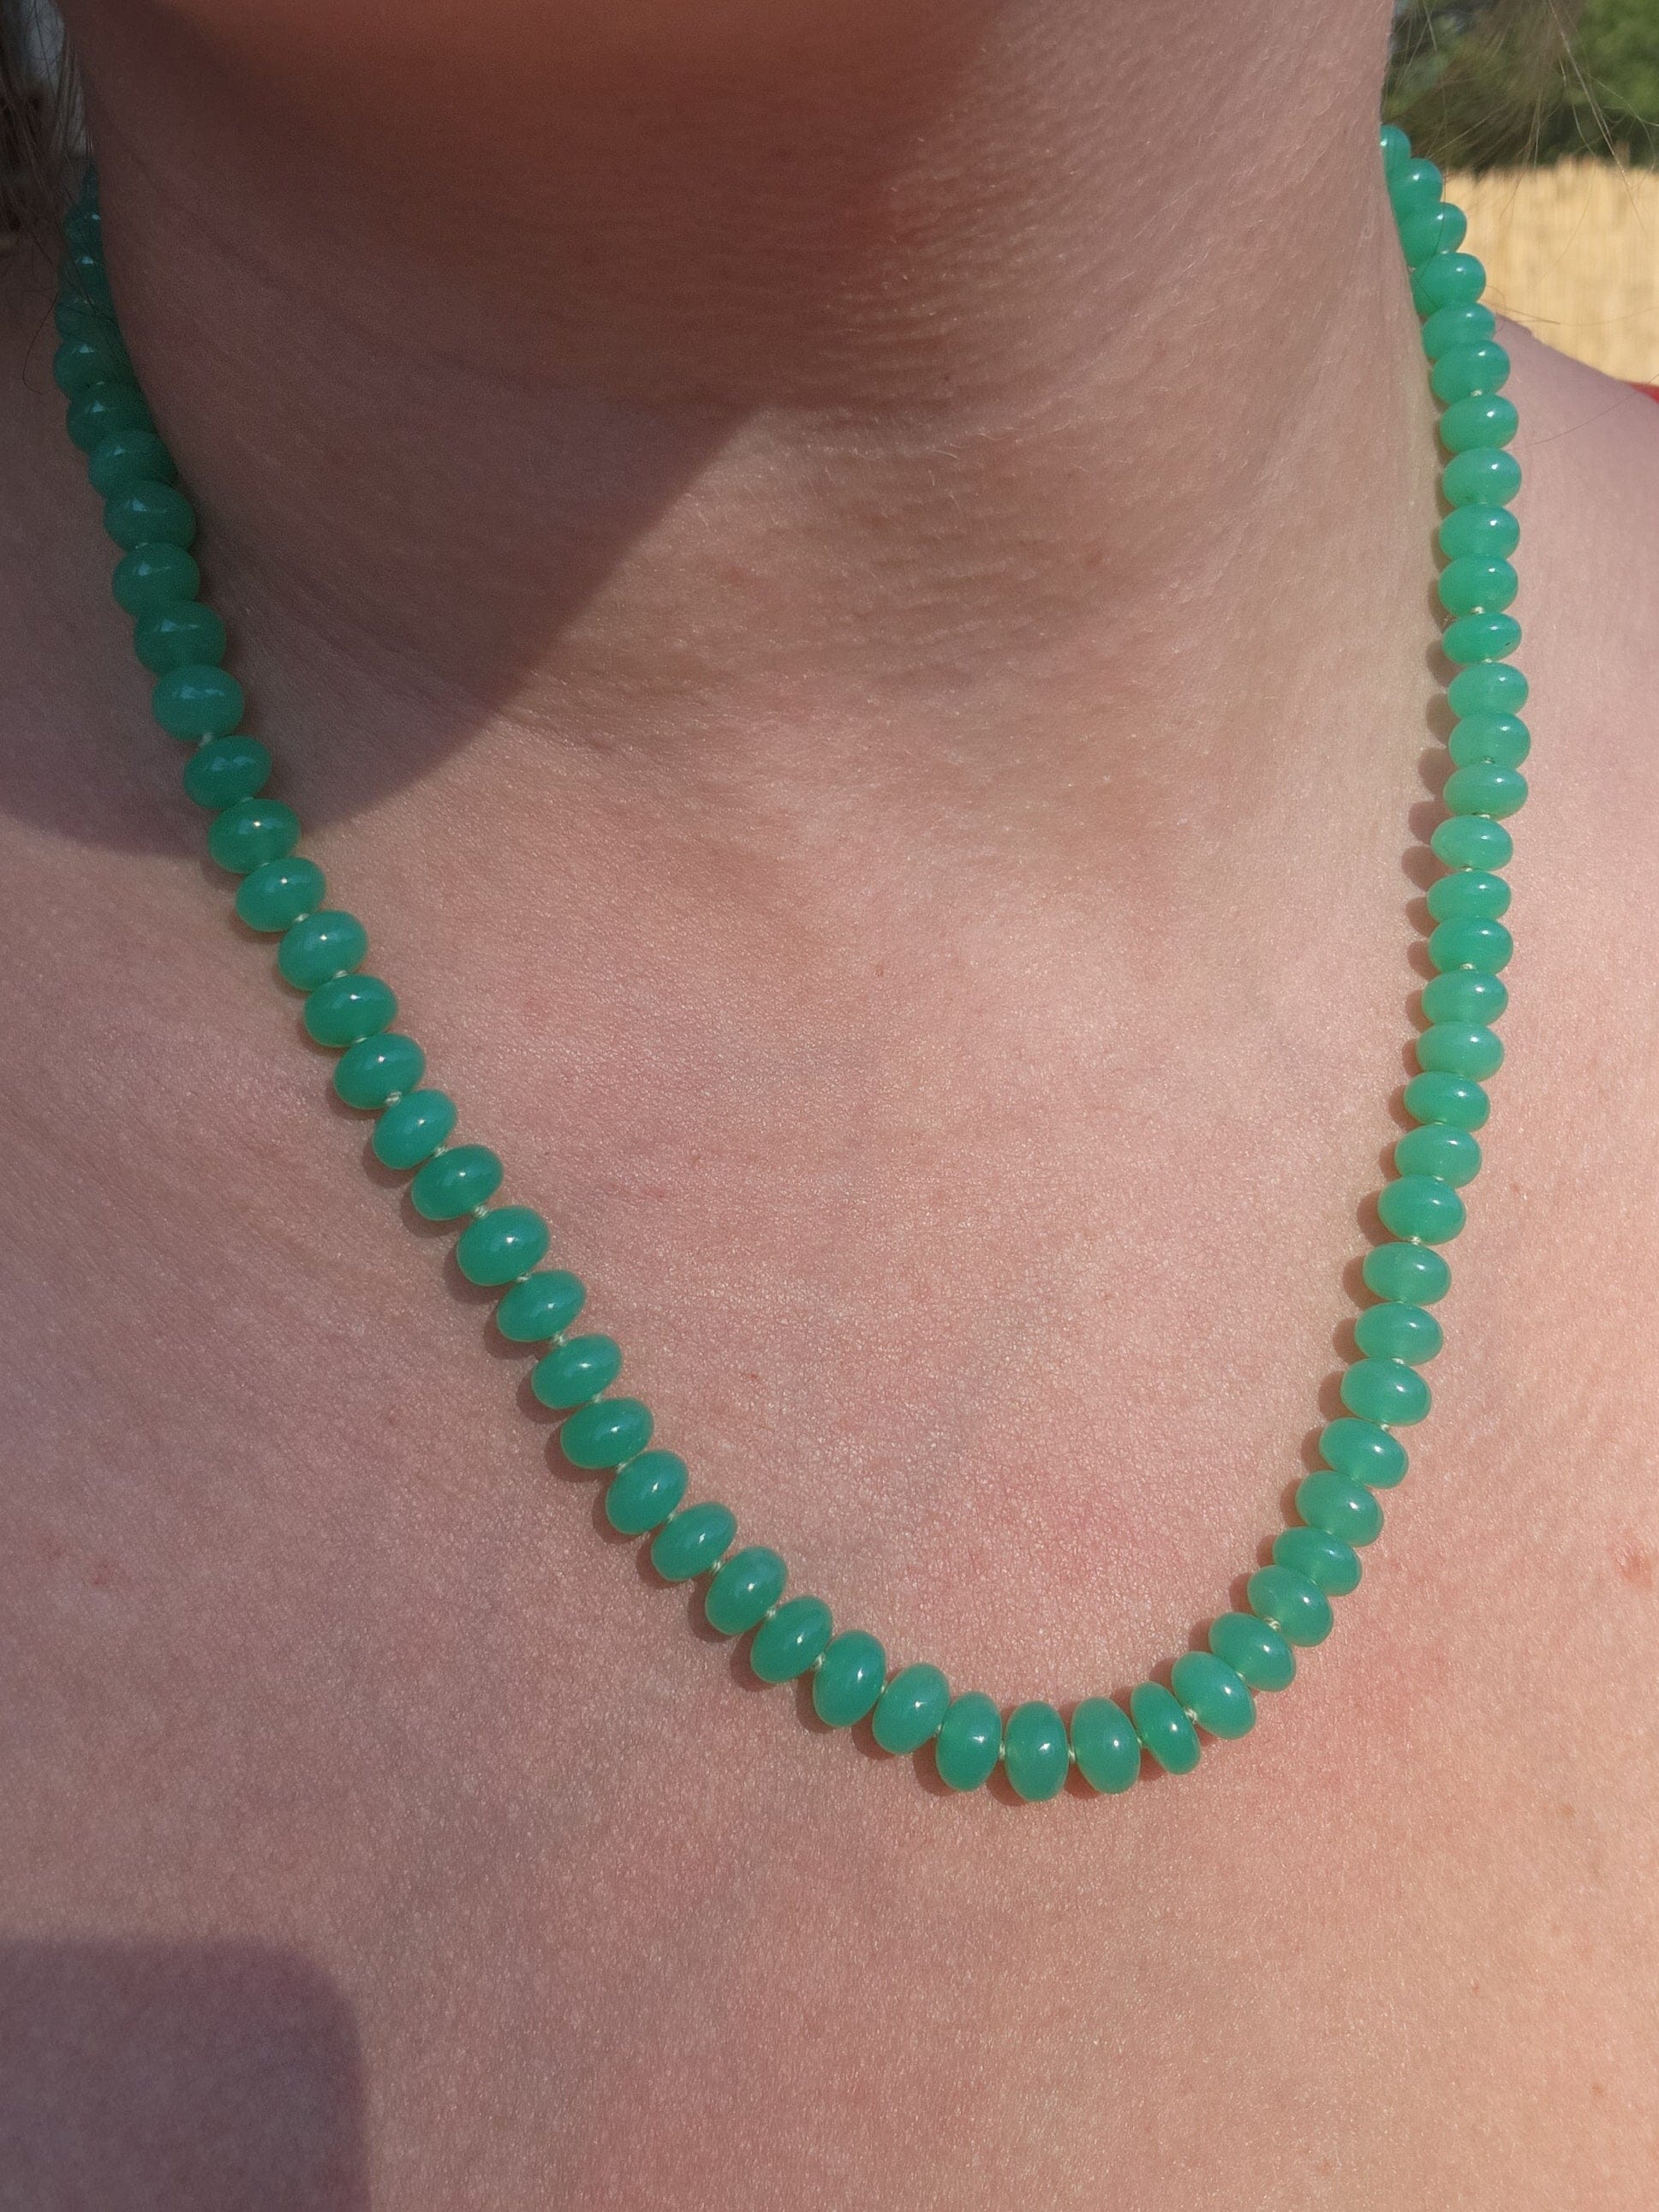 chrysoprase candy bead necklace busy philipps necklace irene neuwirth jacquie aiche gold birthstone jewelry healing brittany myra